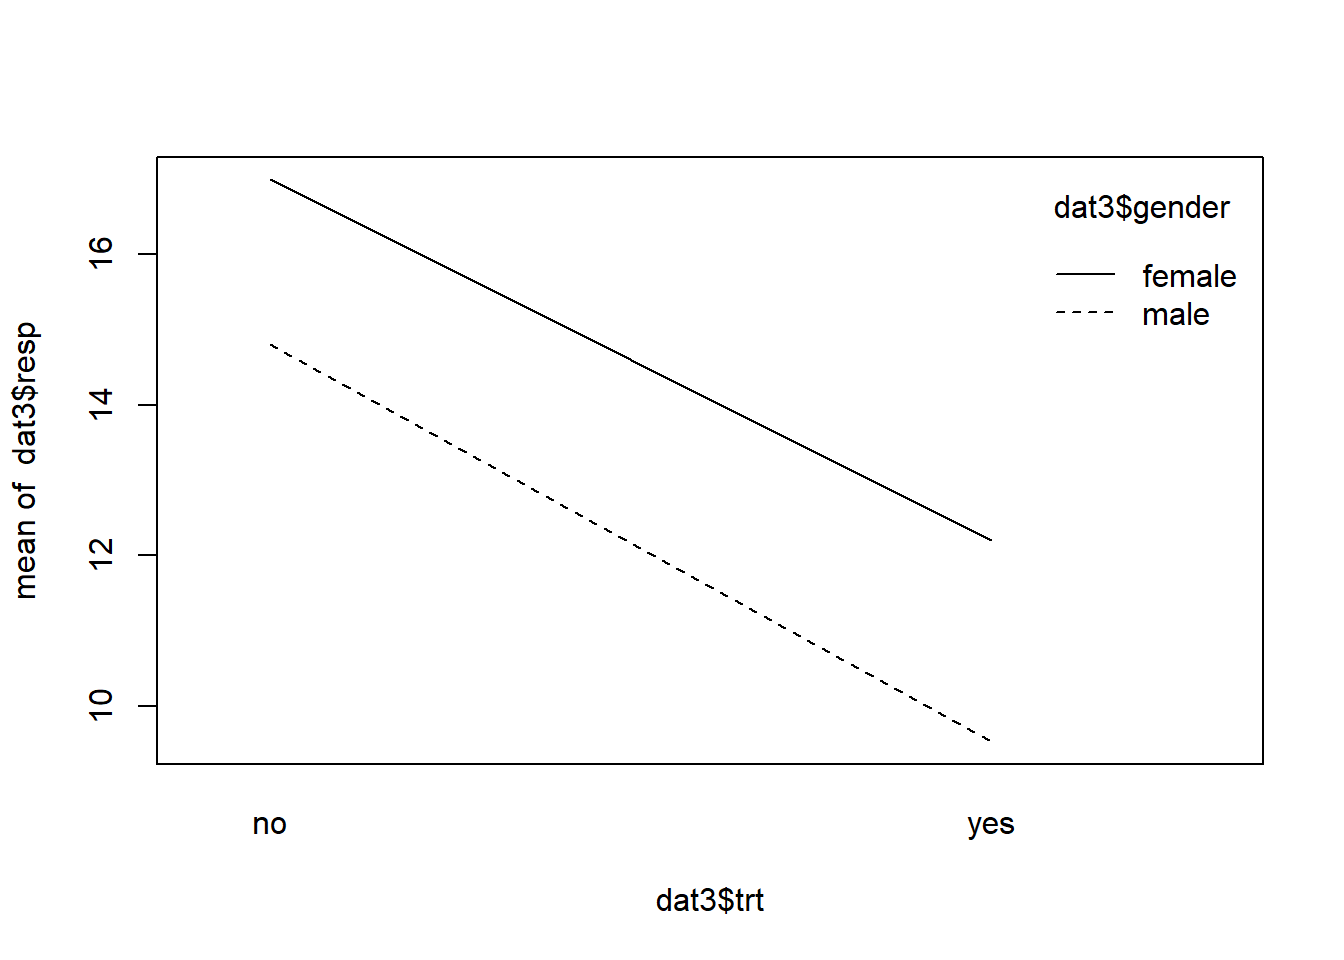 Interaction plot of treatment and gender showing parallel lines.